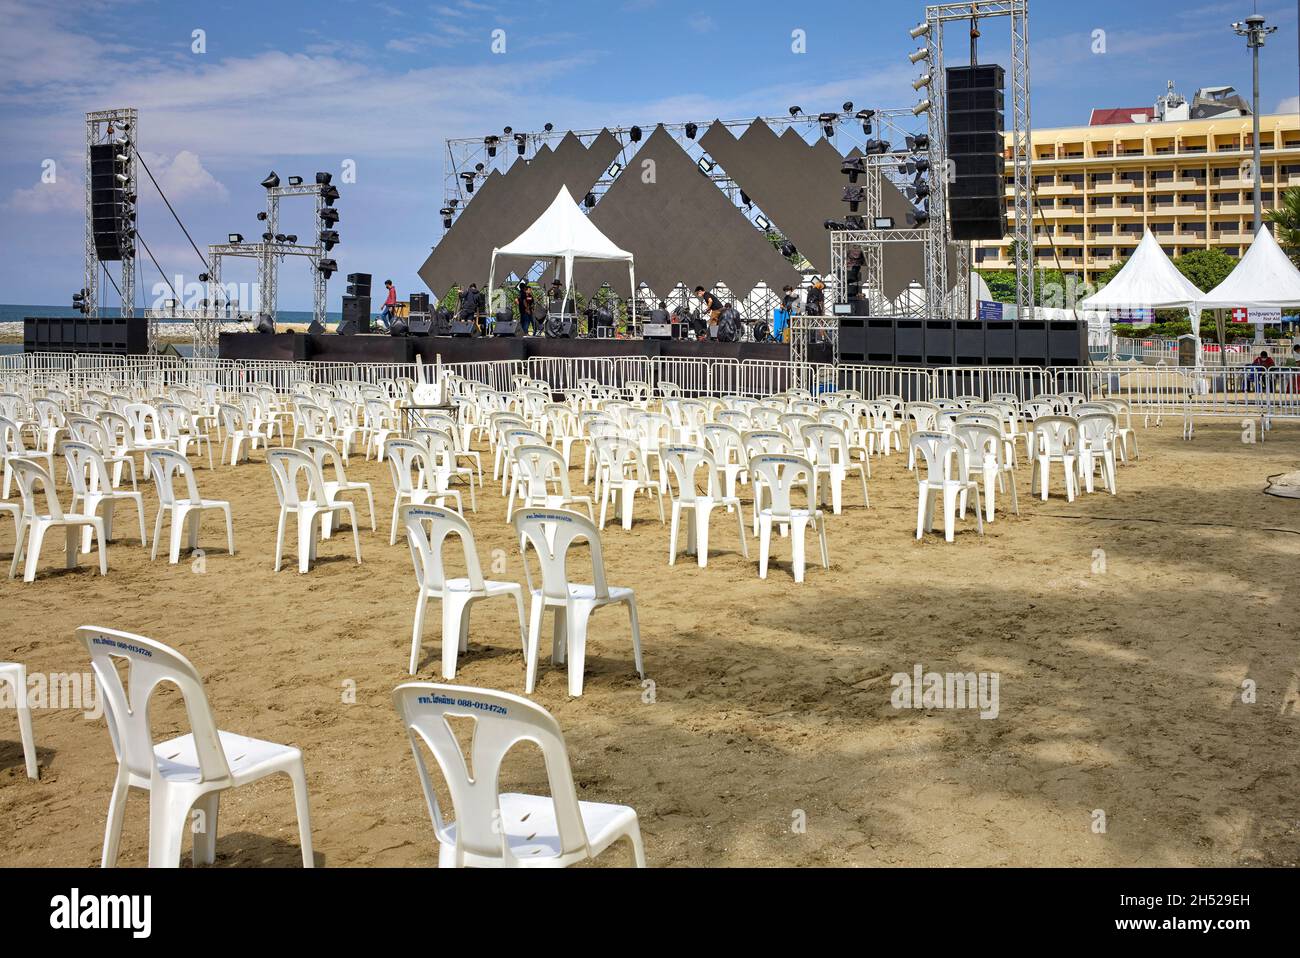 Social distance seating due to ongoing Covid pandemic at the Pattaya Music Festival 2021 Thailand Southeast Asia Stock Photo